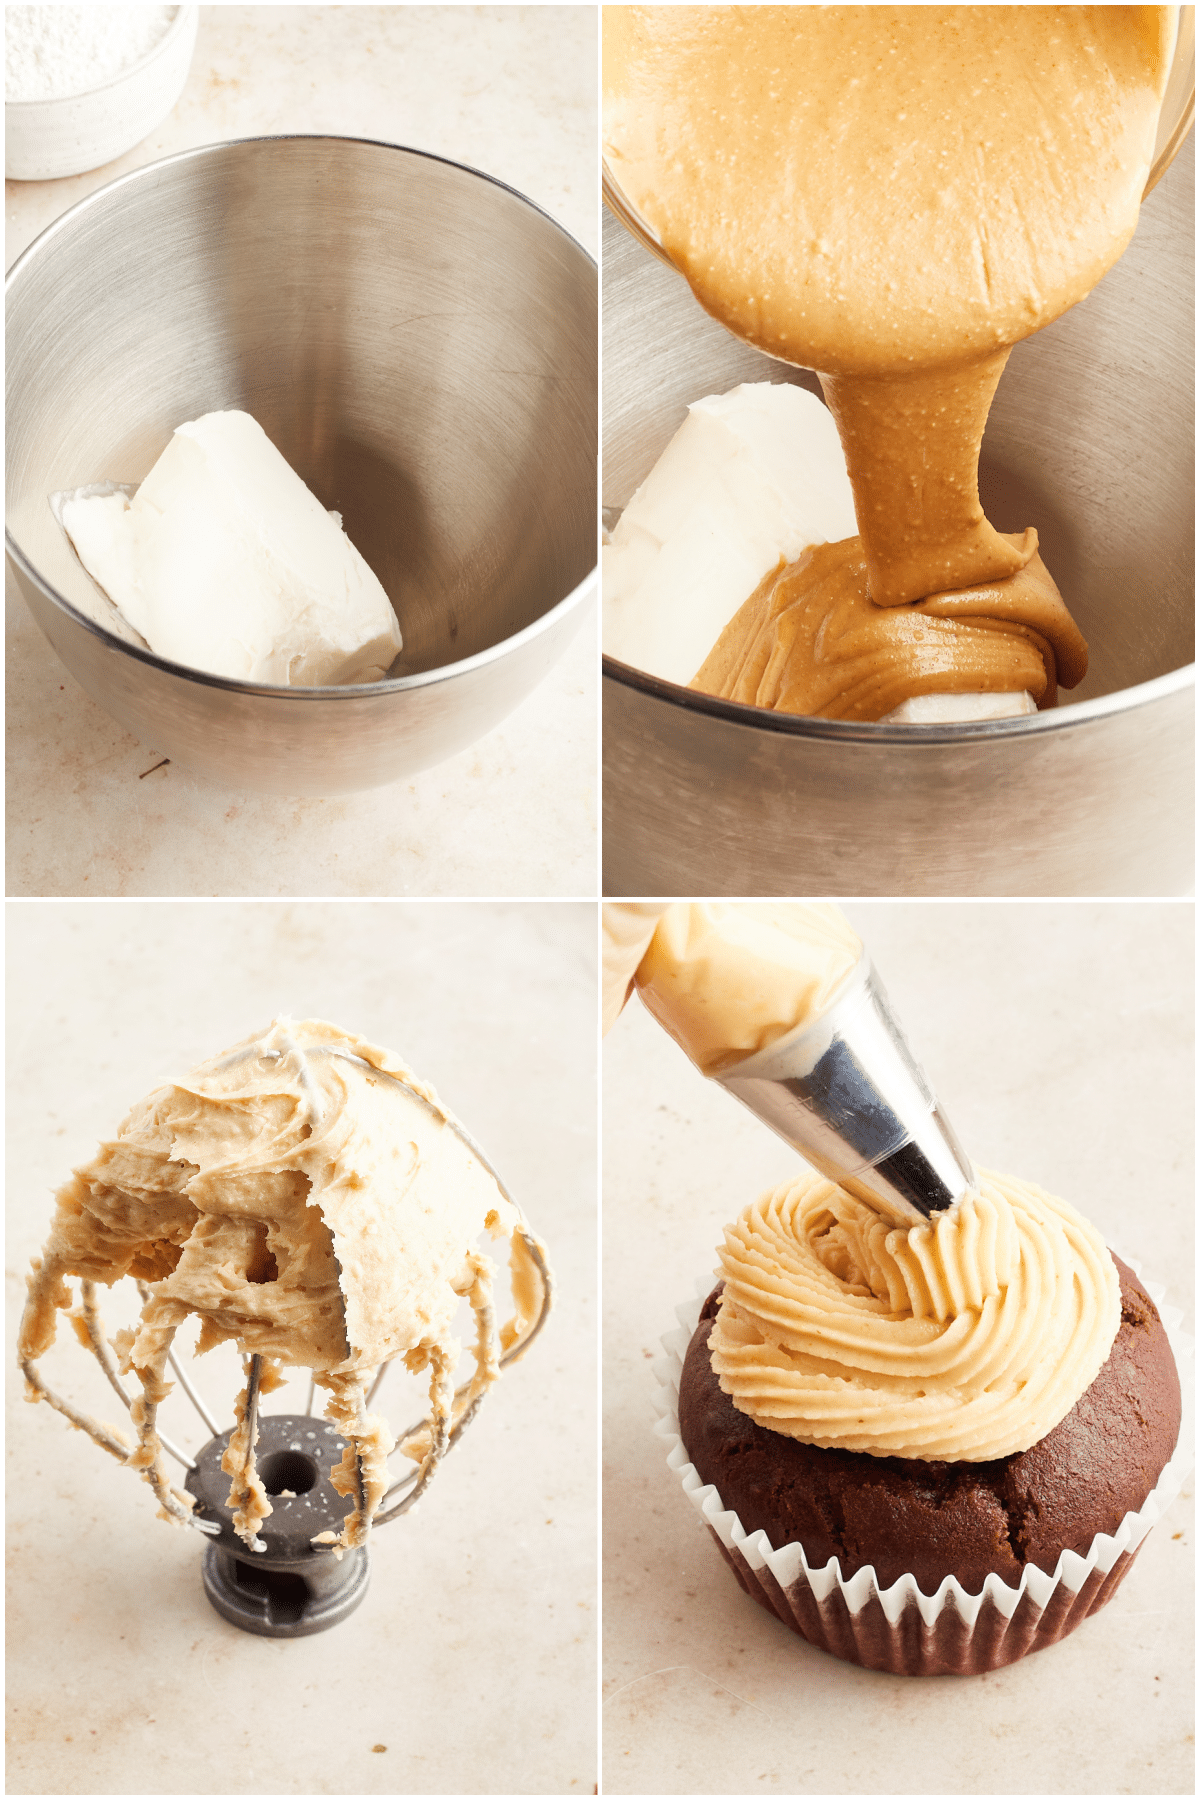 A four image collage showing how to make peanut butter frosting: Add ingredients to a bowl, whip until stiff, pipe onto cupcakes.